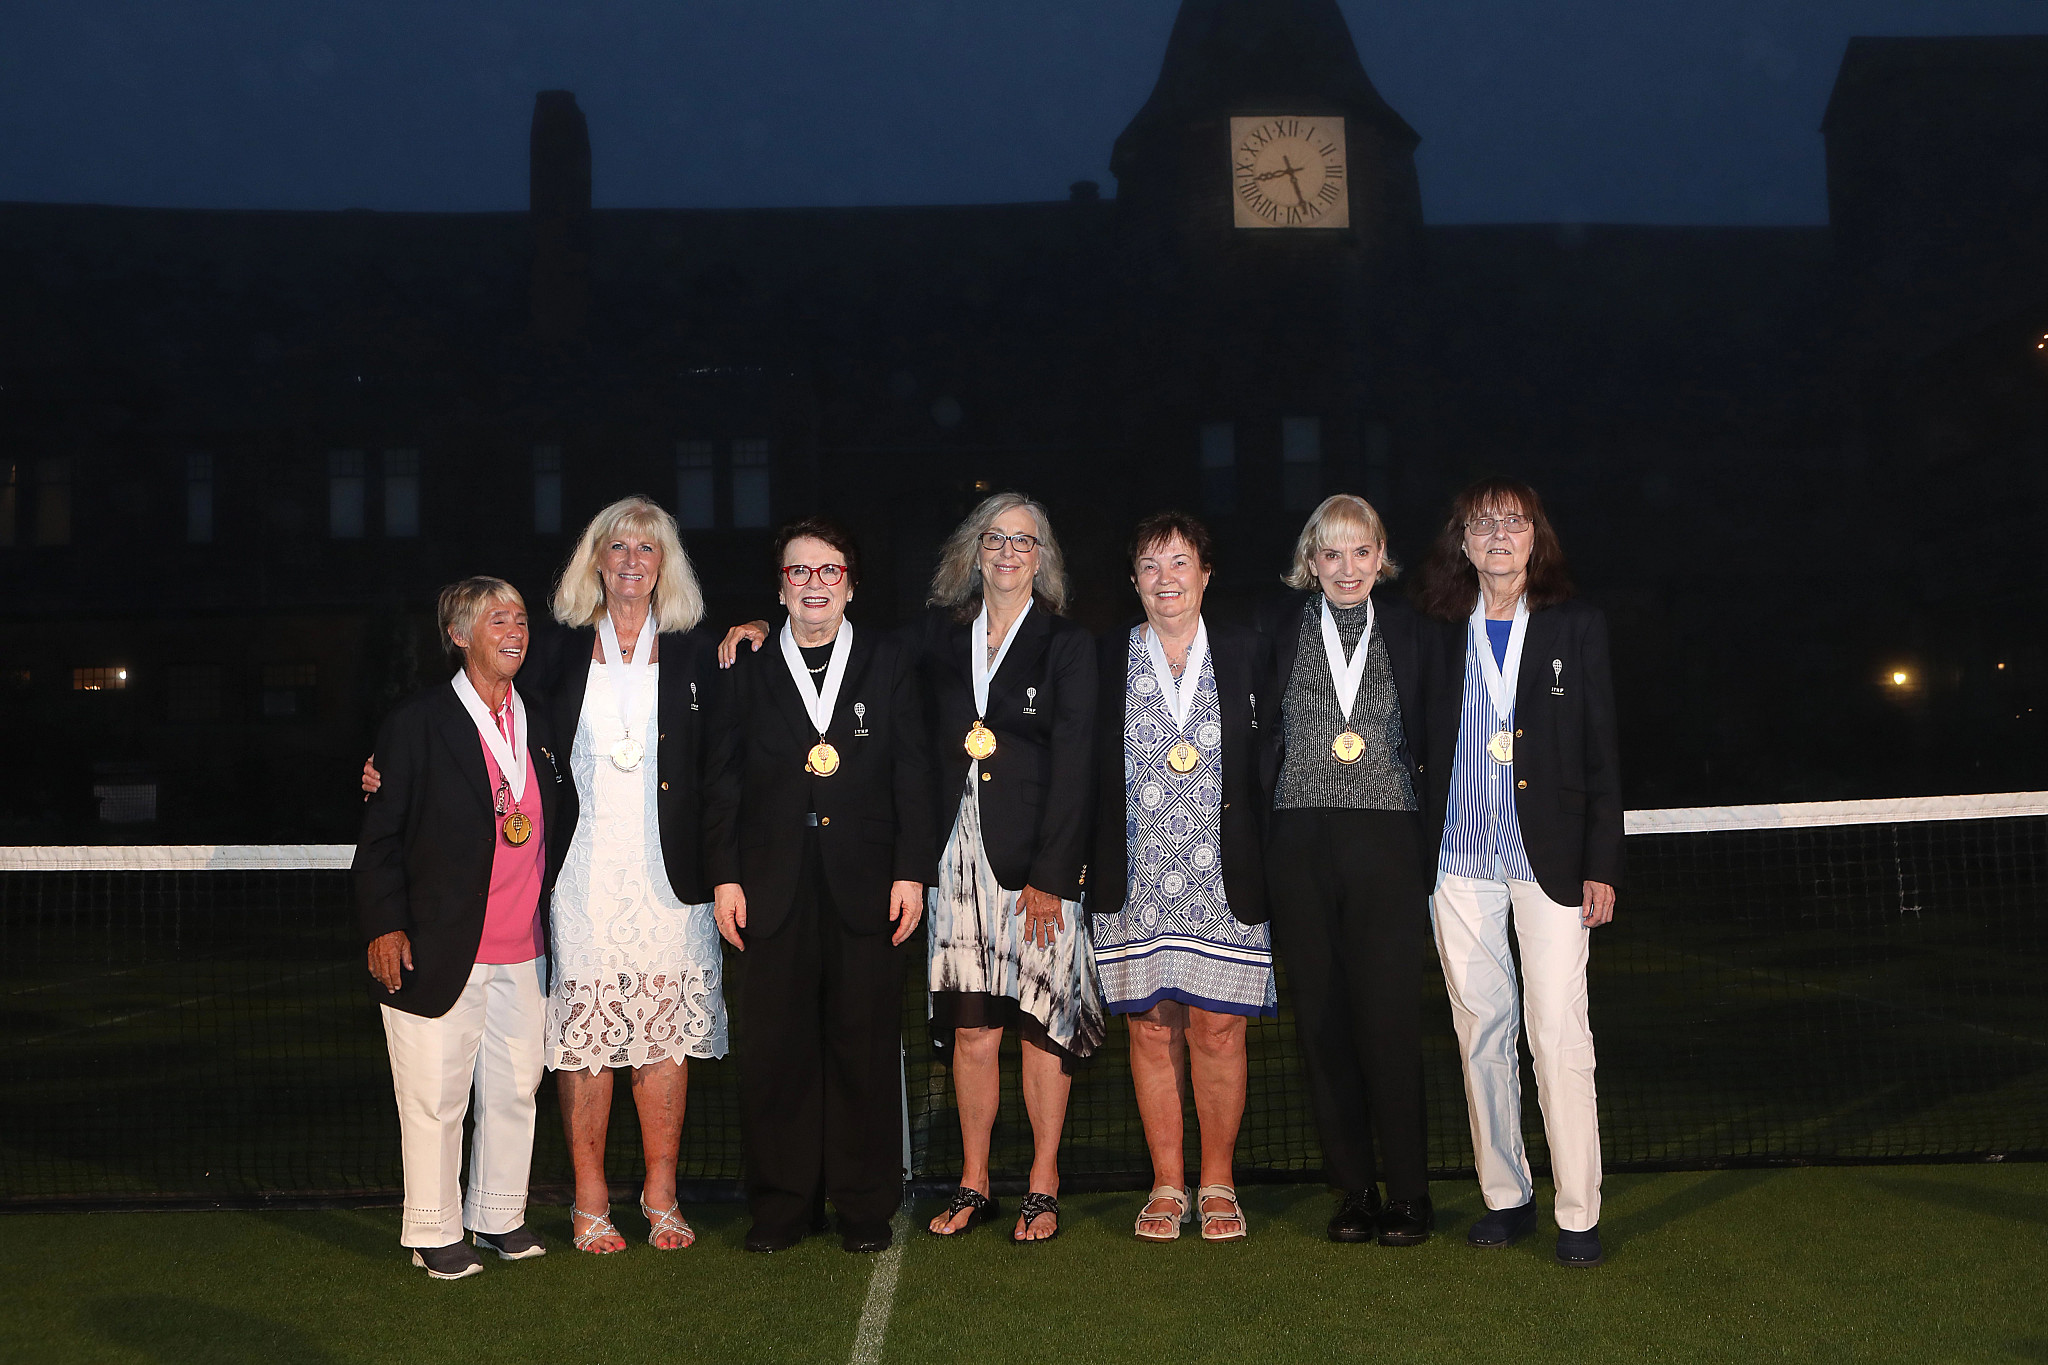 Tales from the International Tennis Hall of Fame Induction Ceremony